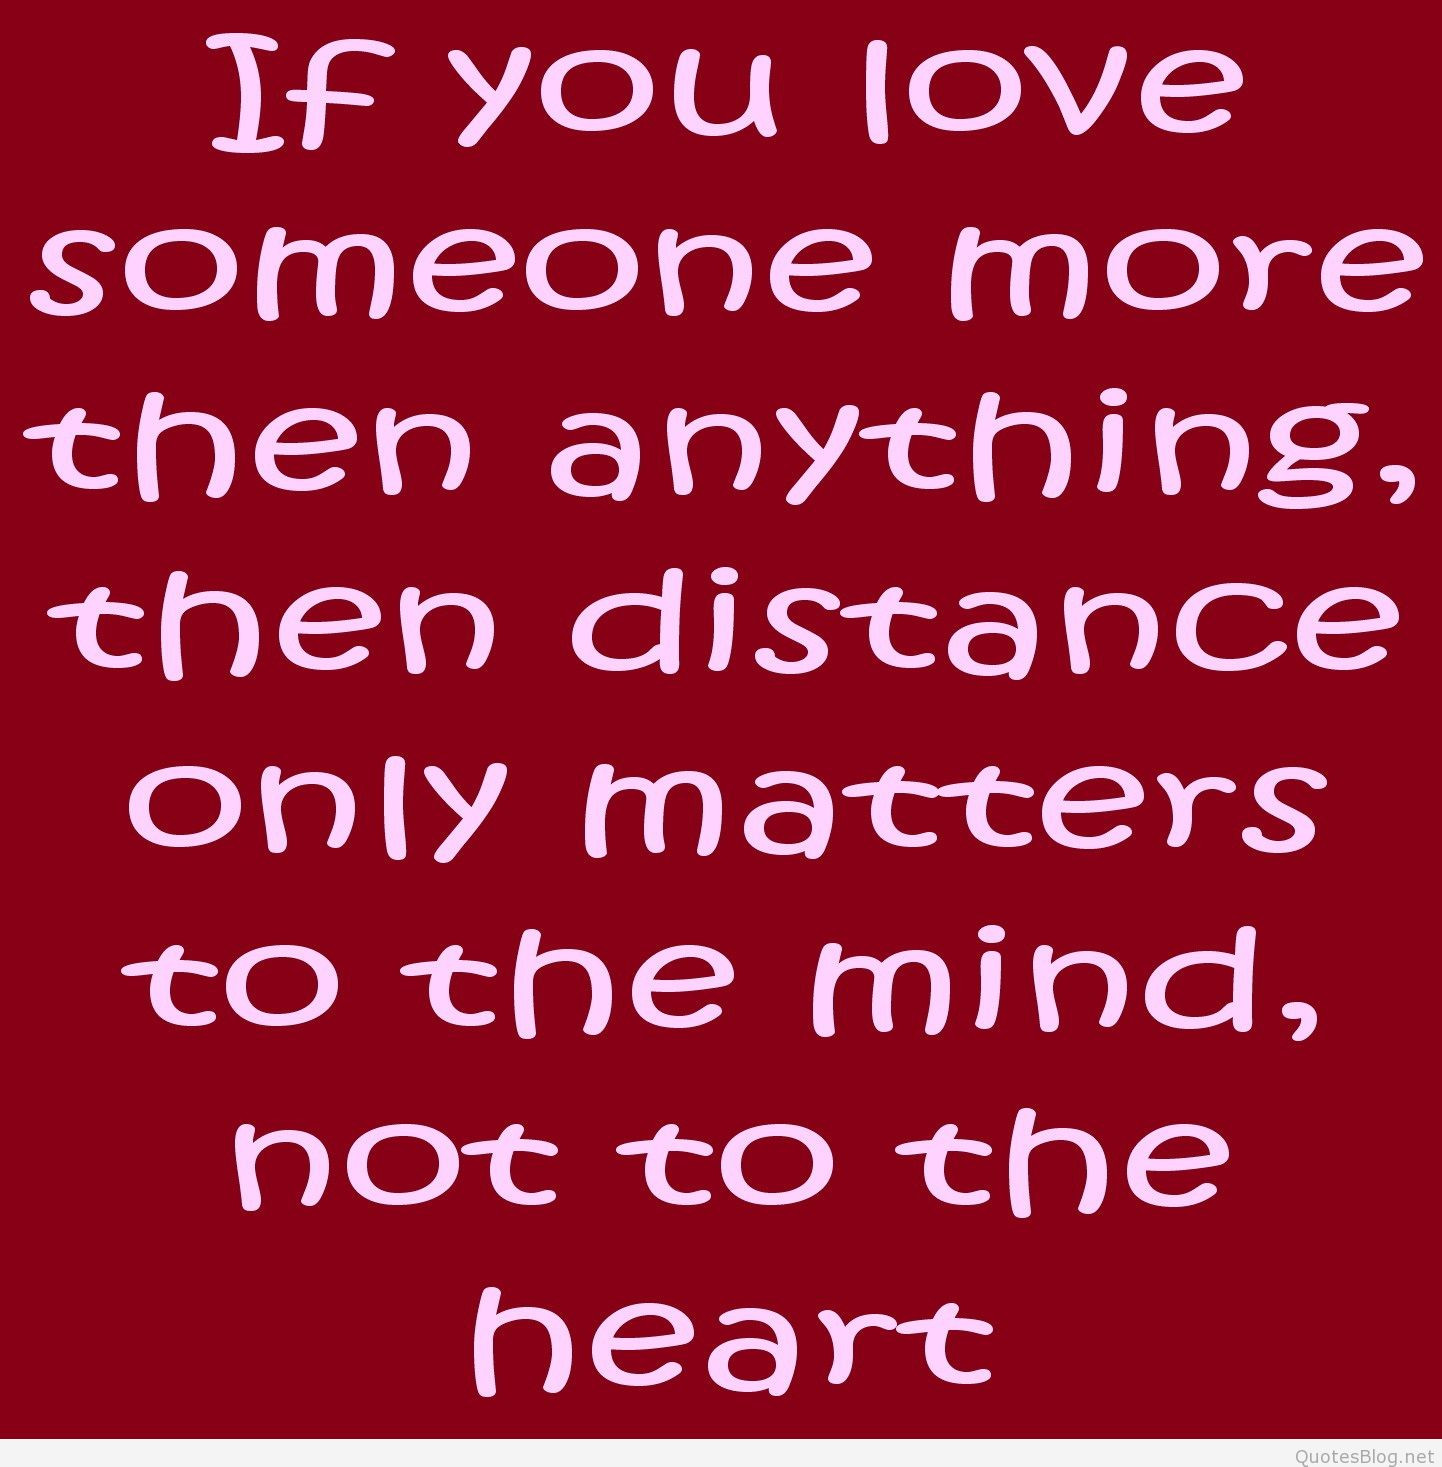 True Love Quotes And Sayings
 Quotes About Finding True Love QuotesGram